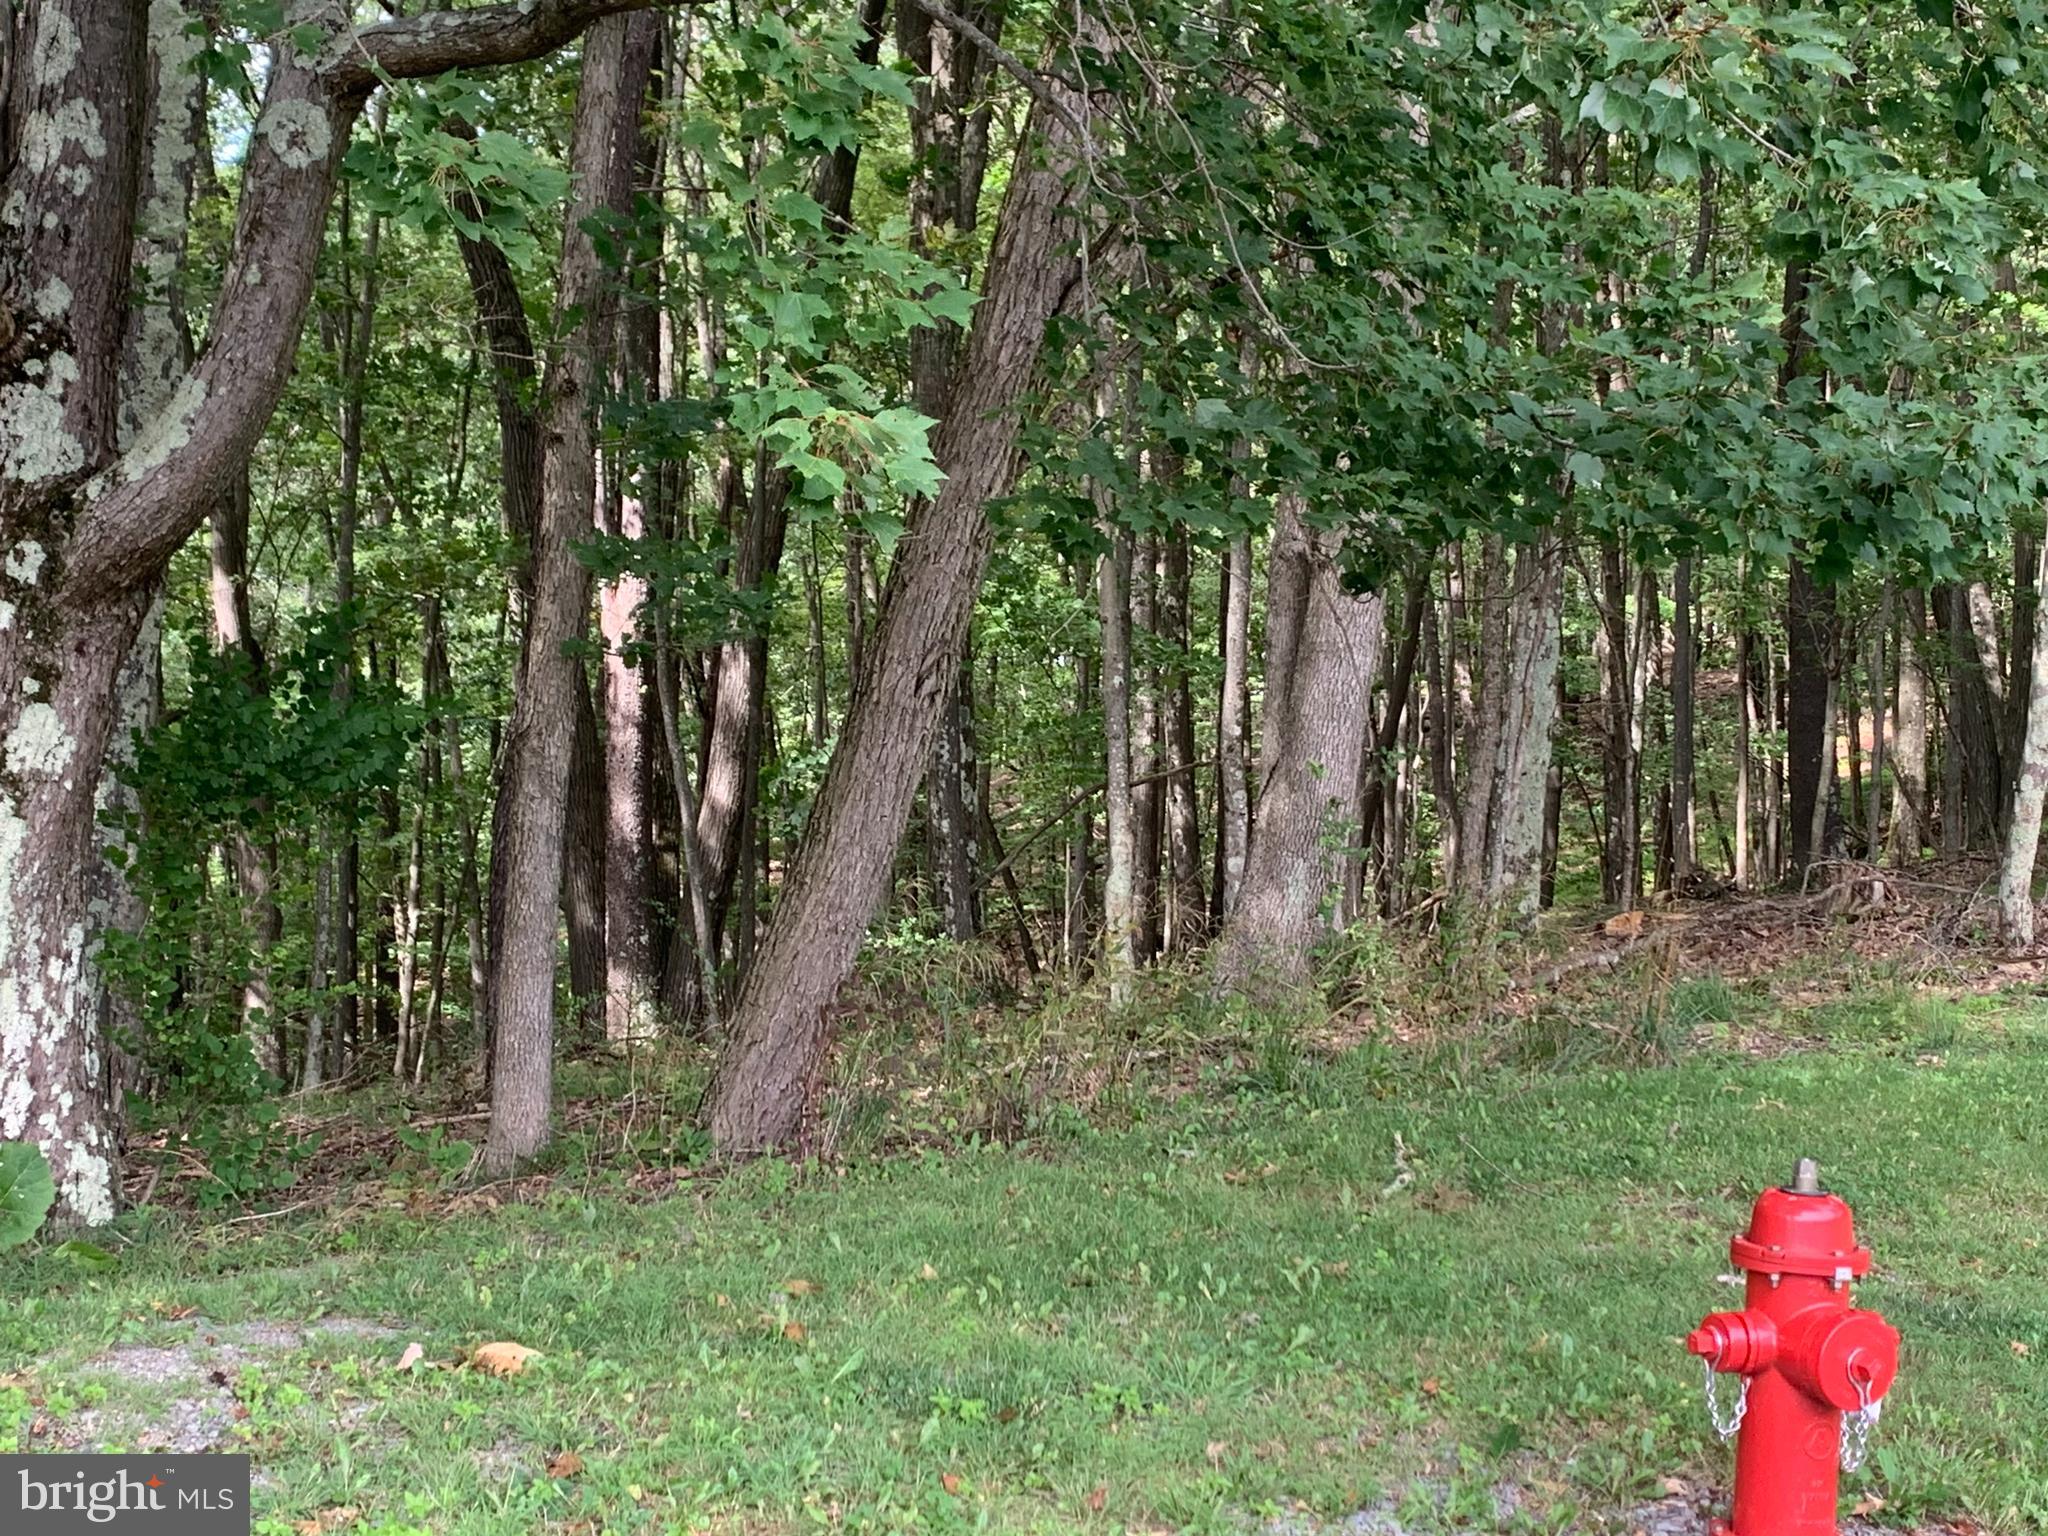 a fire hydrant in the middle of a forest